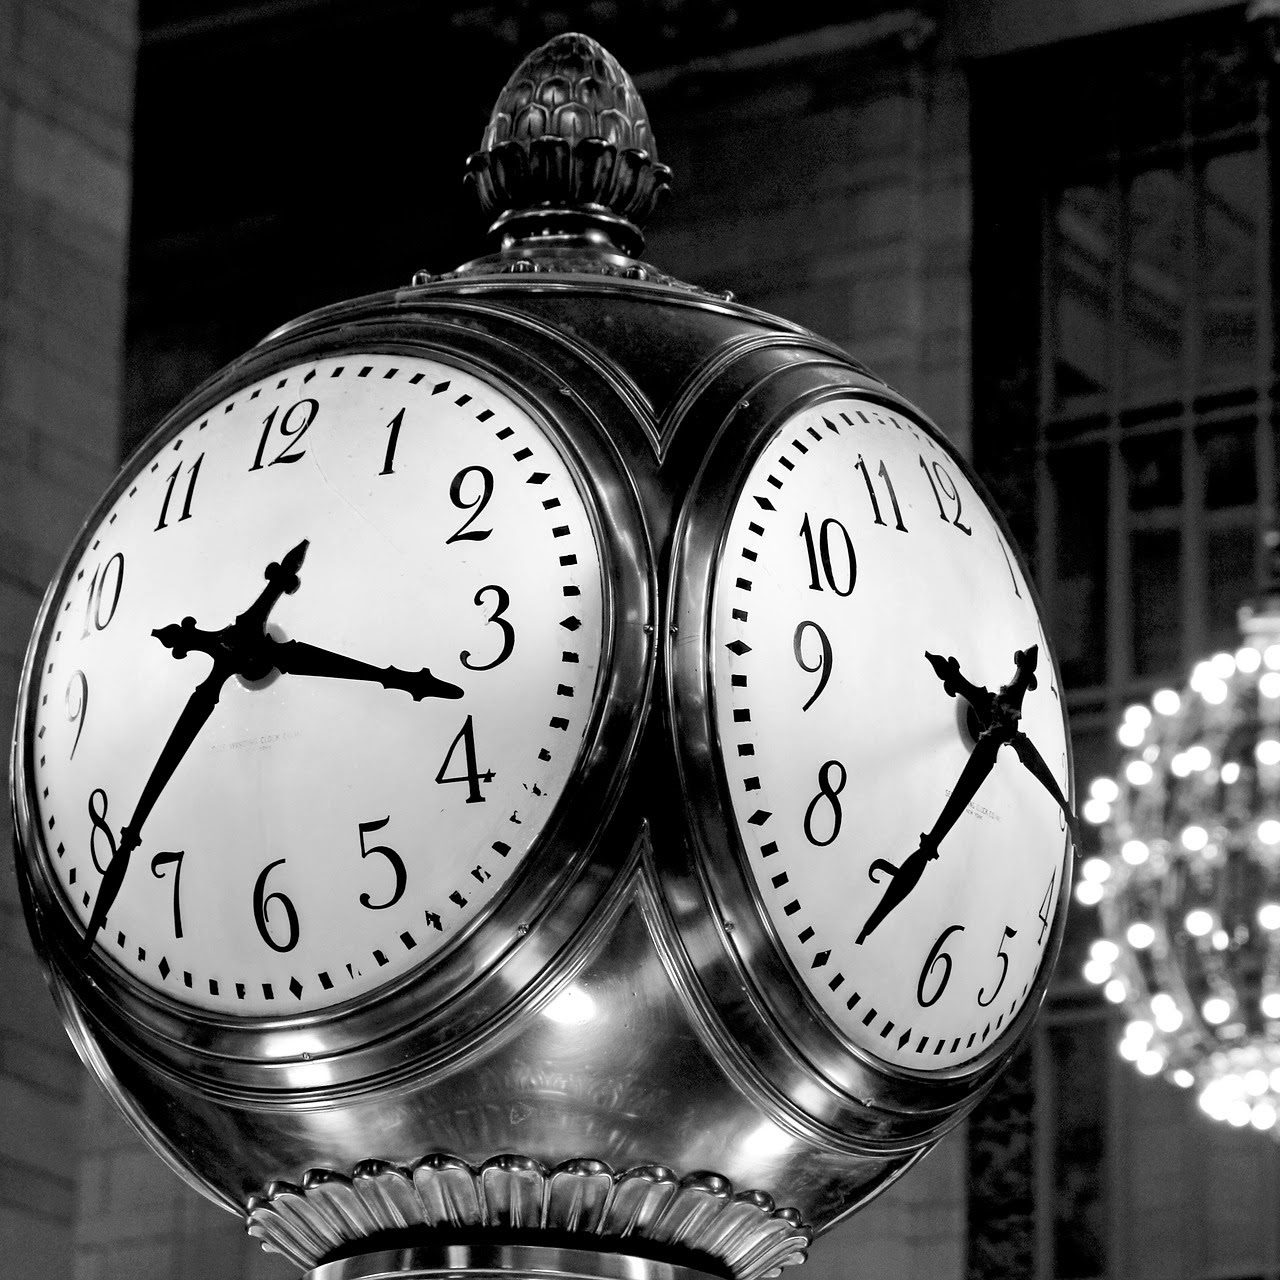 Black and white image of clocks built into a pole.